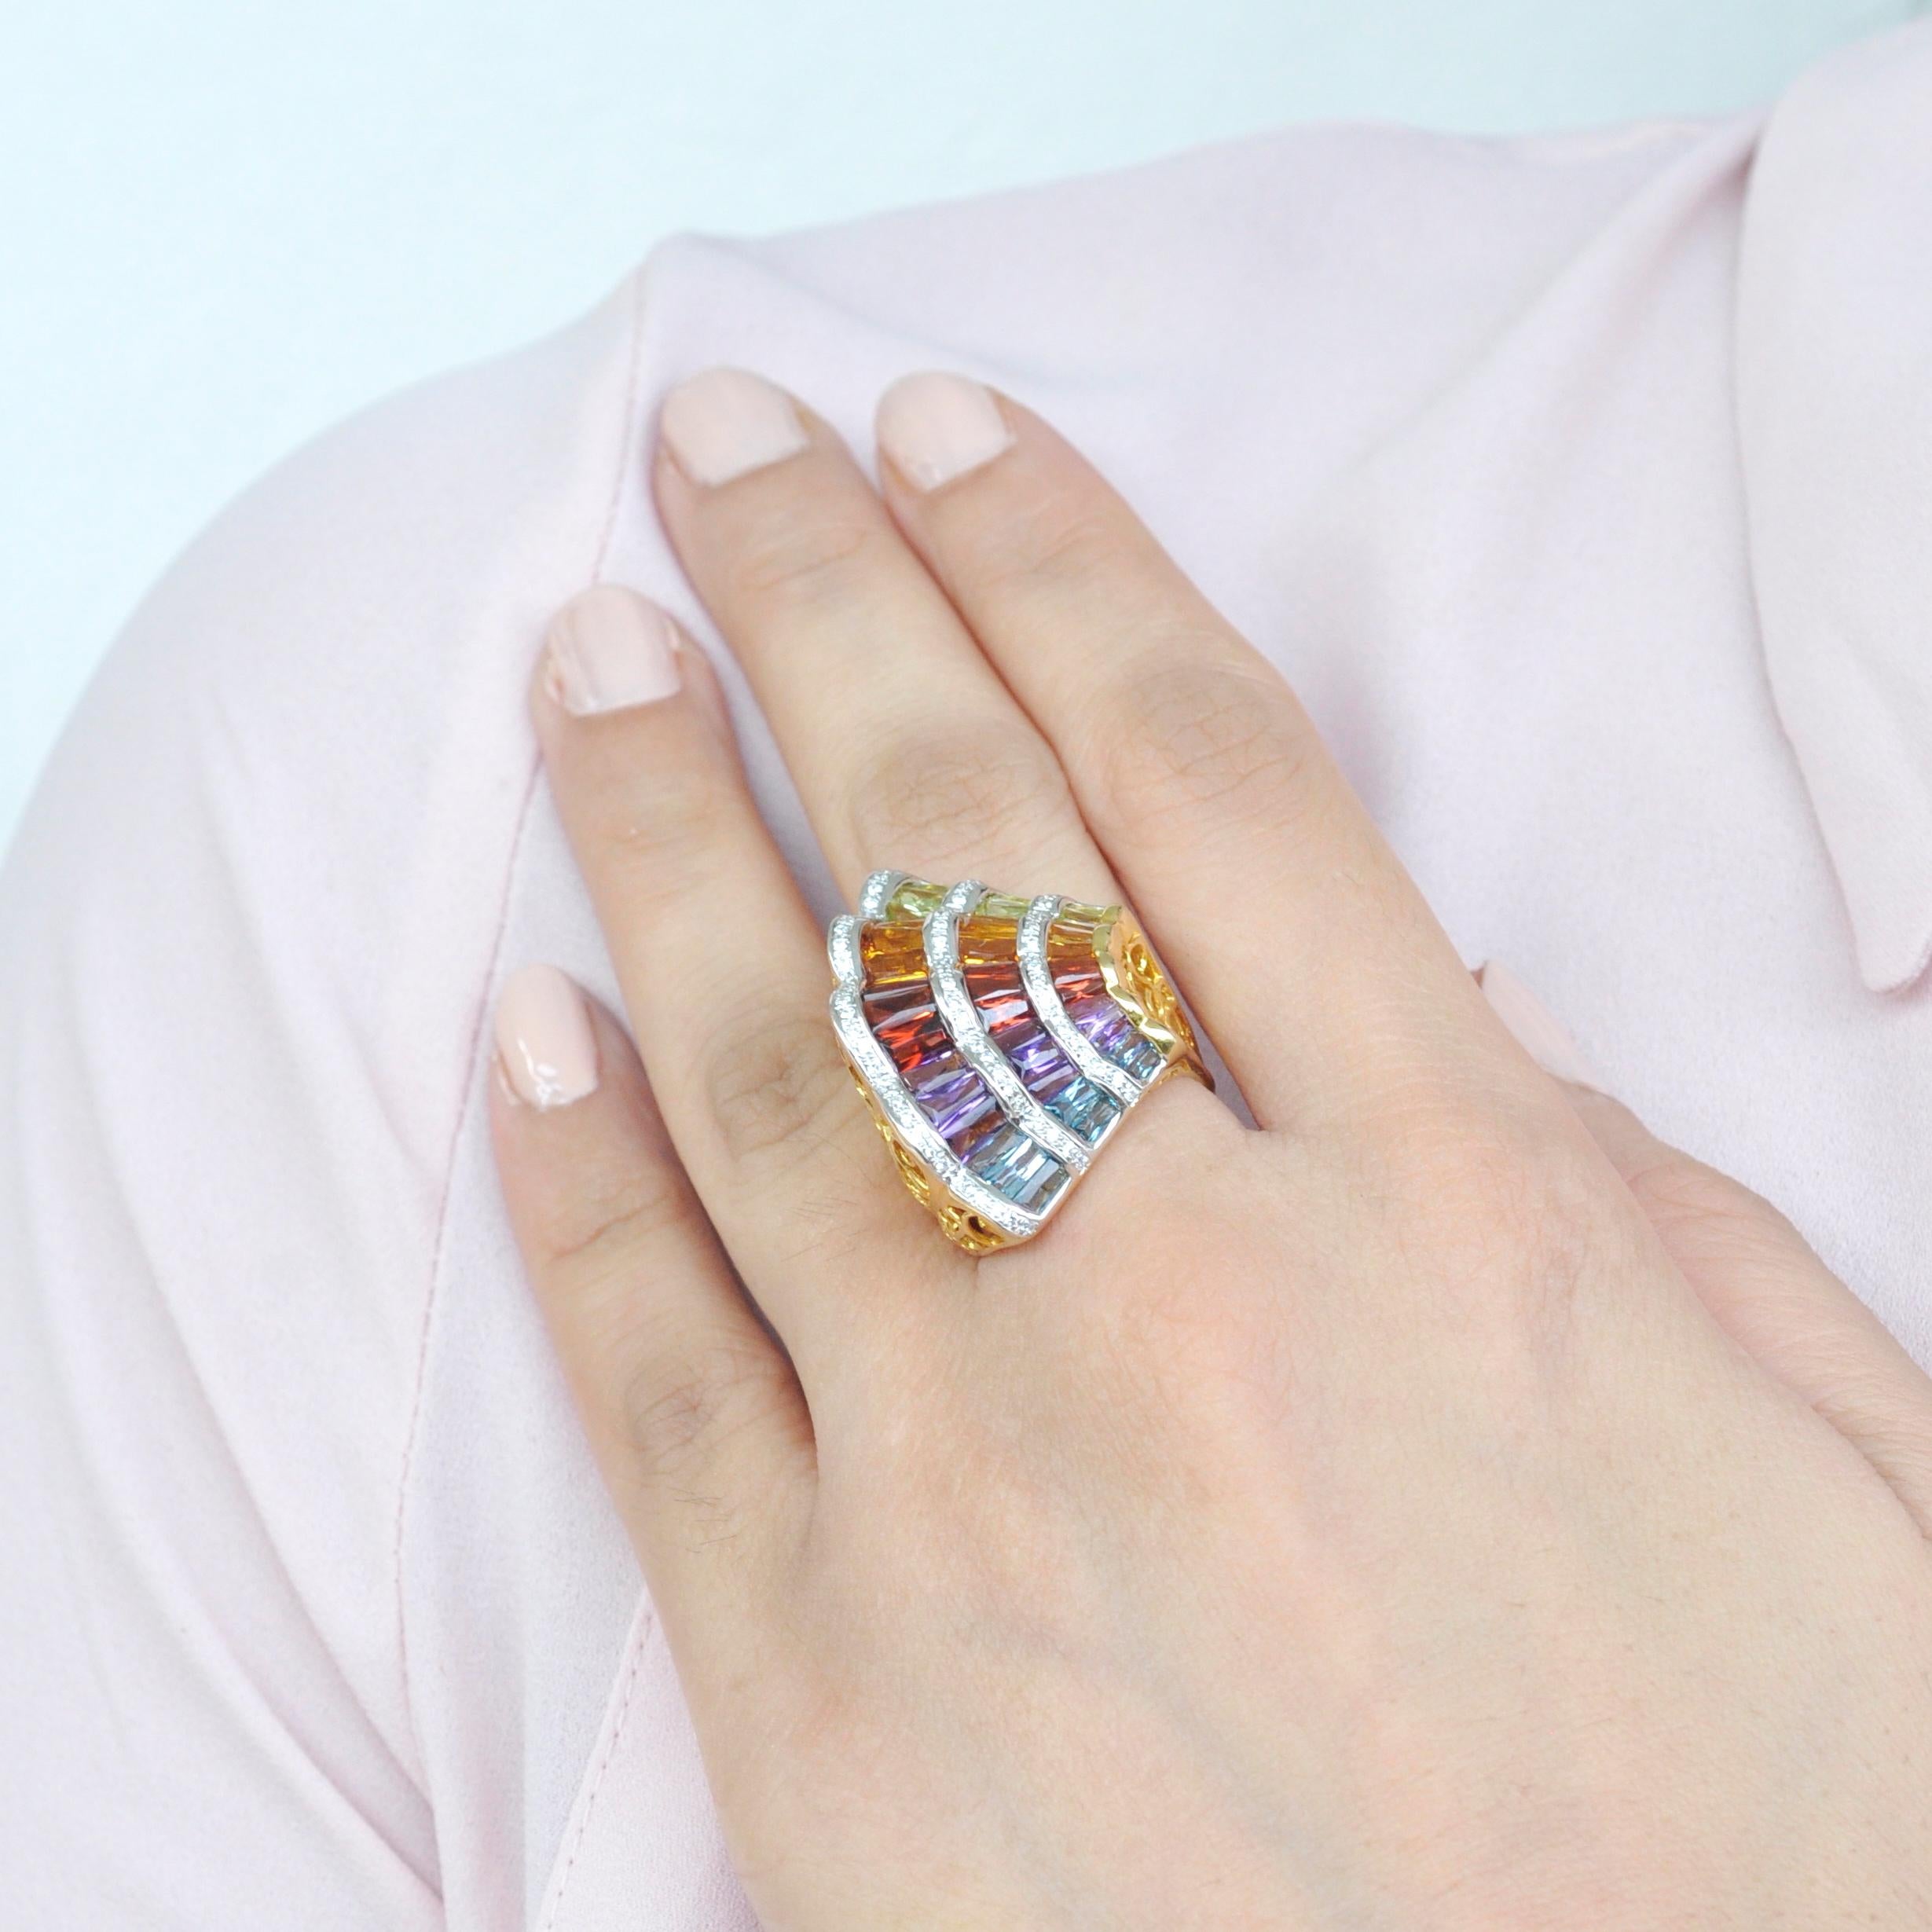 Inspired by the Japanese culture of Folding Fans, we present to you the SENSU cocktail Ring using 18K gold, topaz, amethyst, garnet, citrine, peridot and diamonds. Sensu meaning a “Folding Fan”, is a symbol of prosperity as it spreads out when we